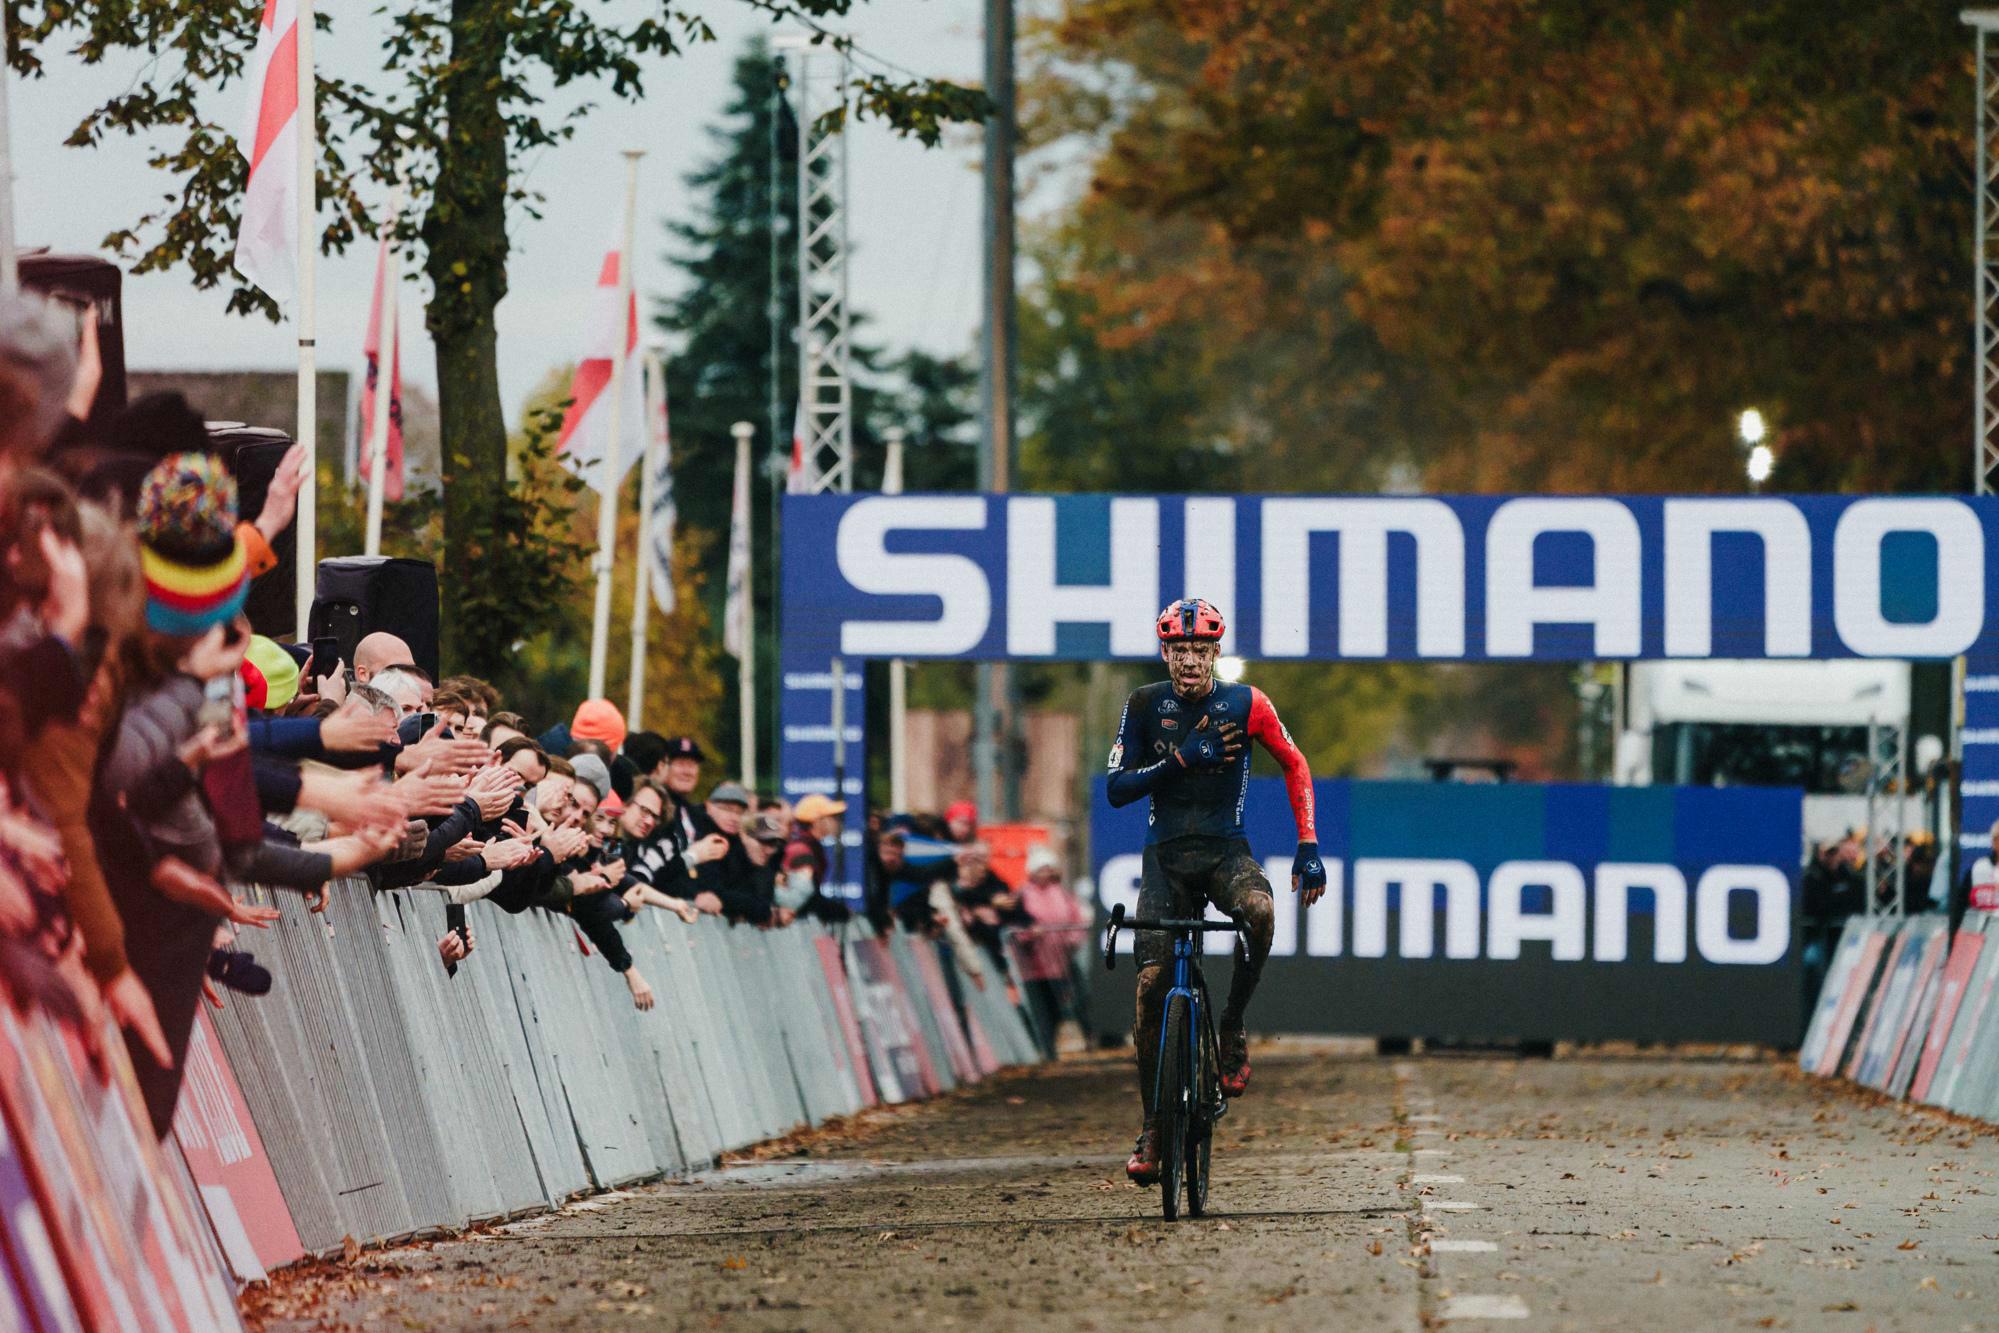 Pim Ronhaar wins his first UCI World Cup round among the Men Elite in Dendermonde